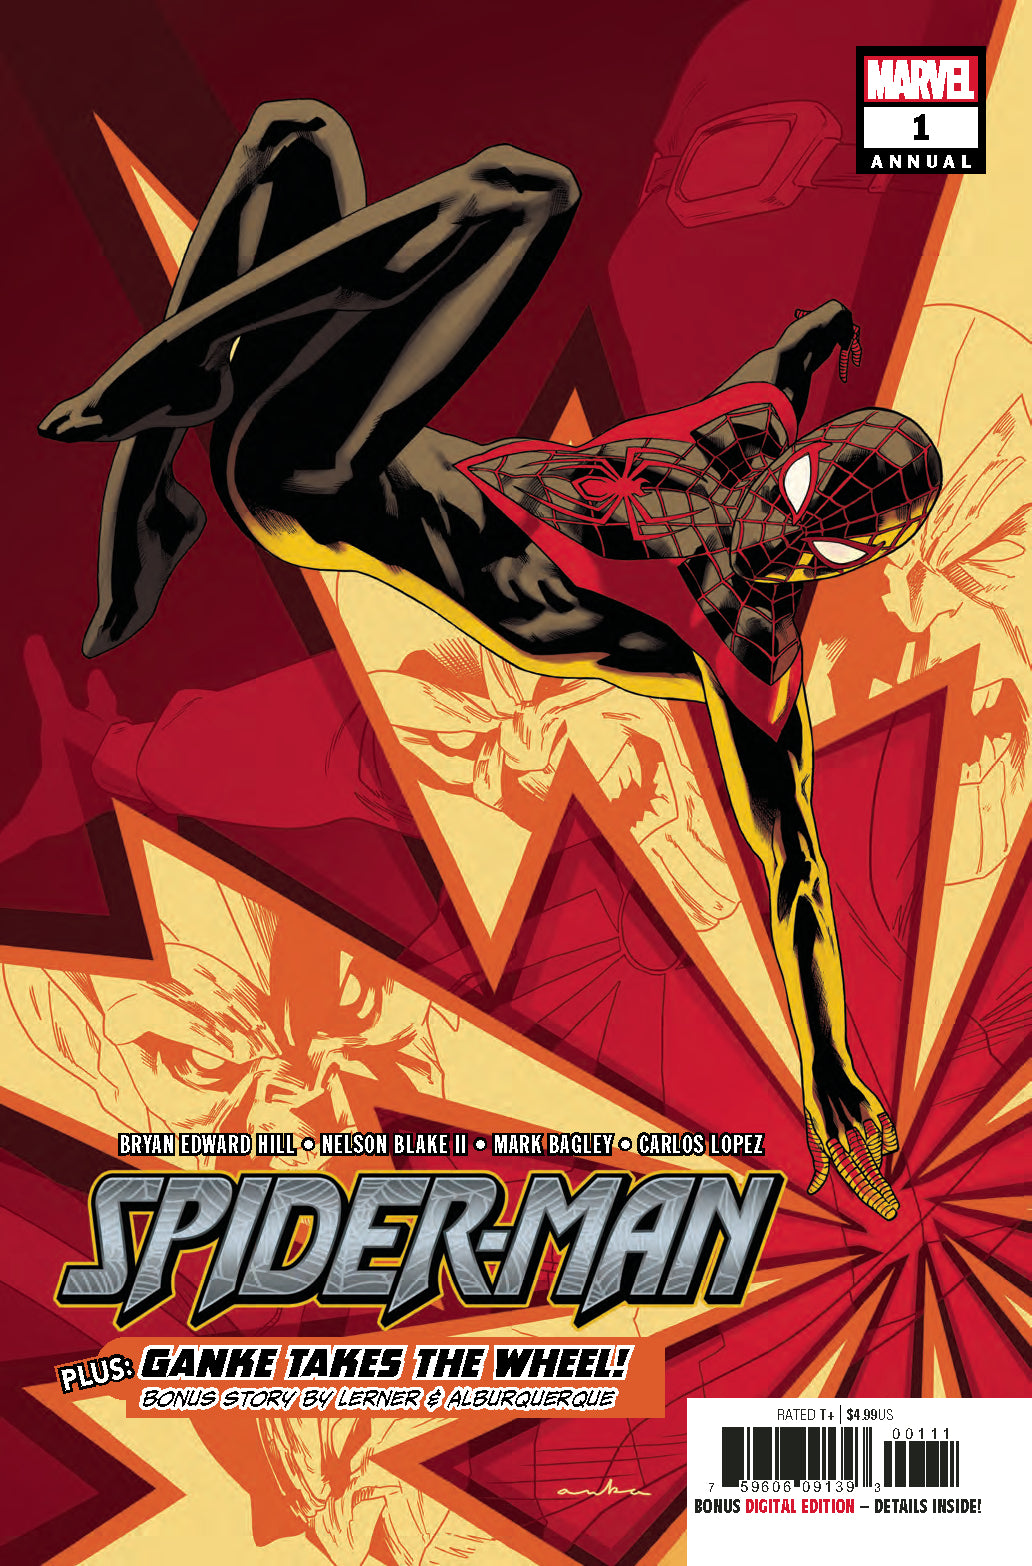 SPIDER-MAN ANNUAL #1 COVER